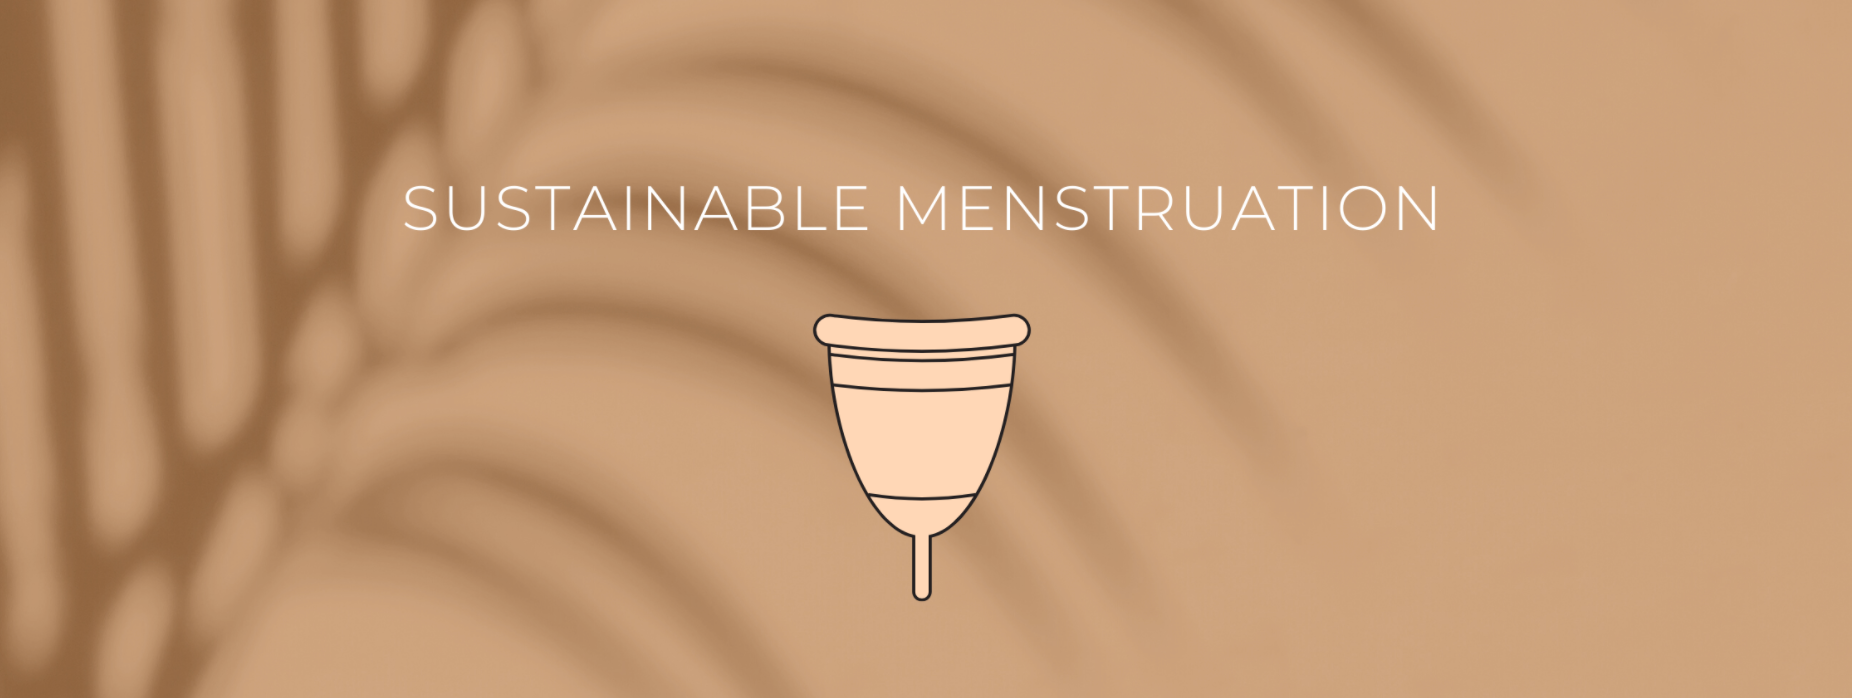 Menstrual Cup - comfortable, sustainable, easy to reach and use